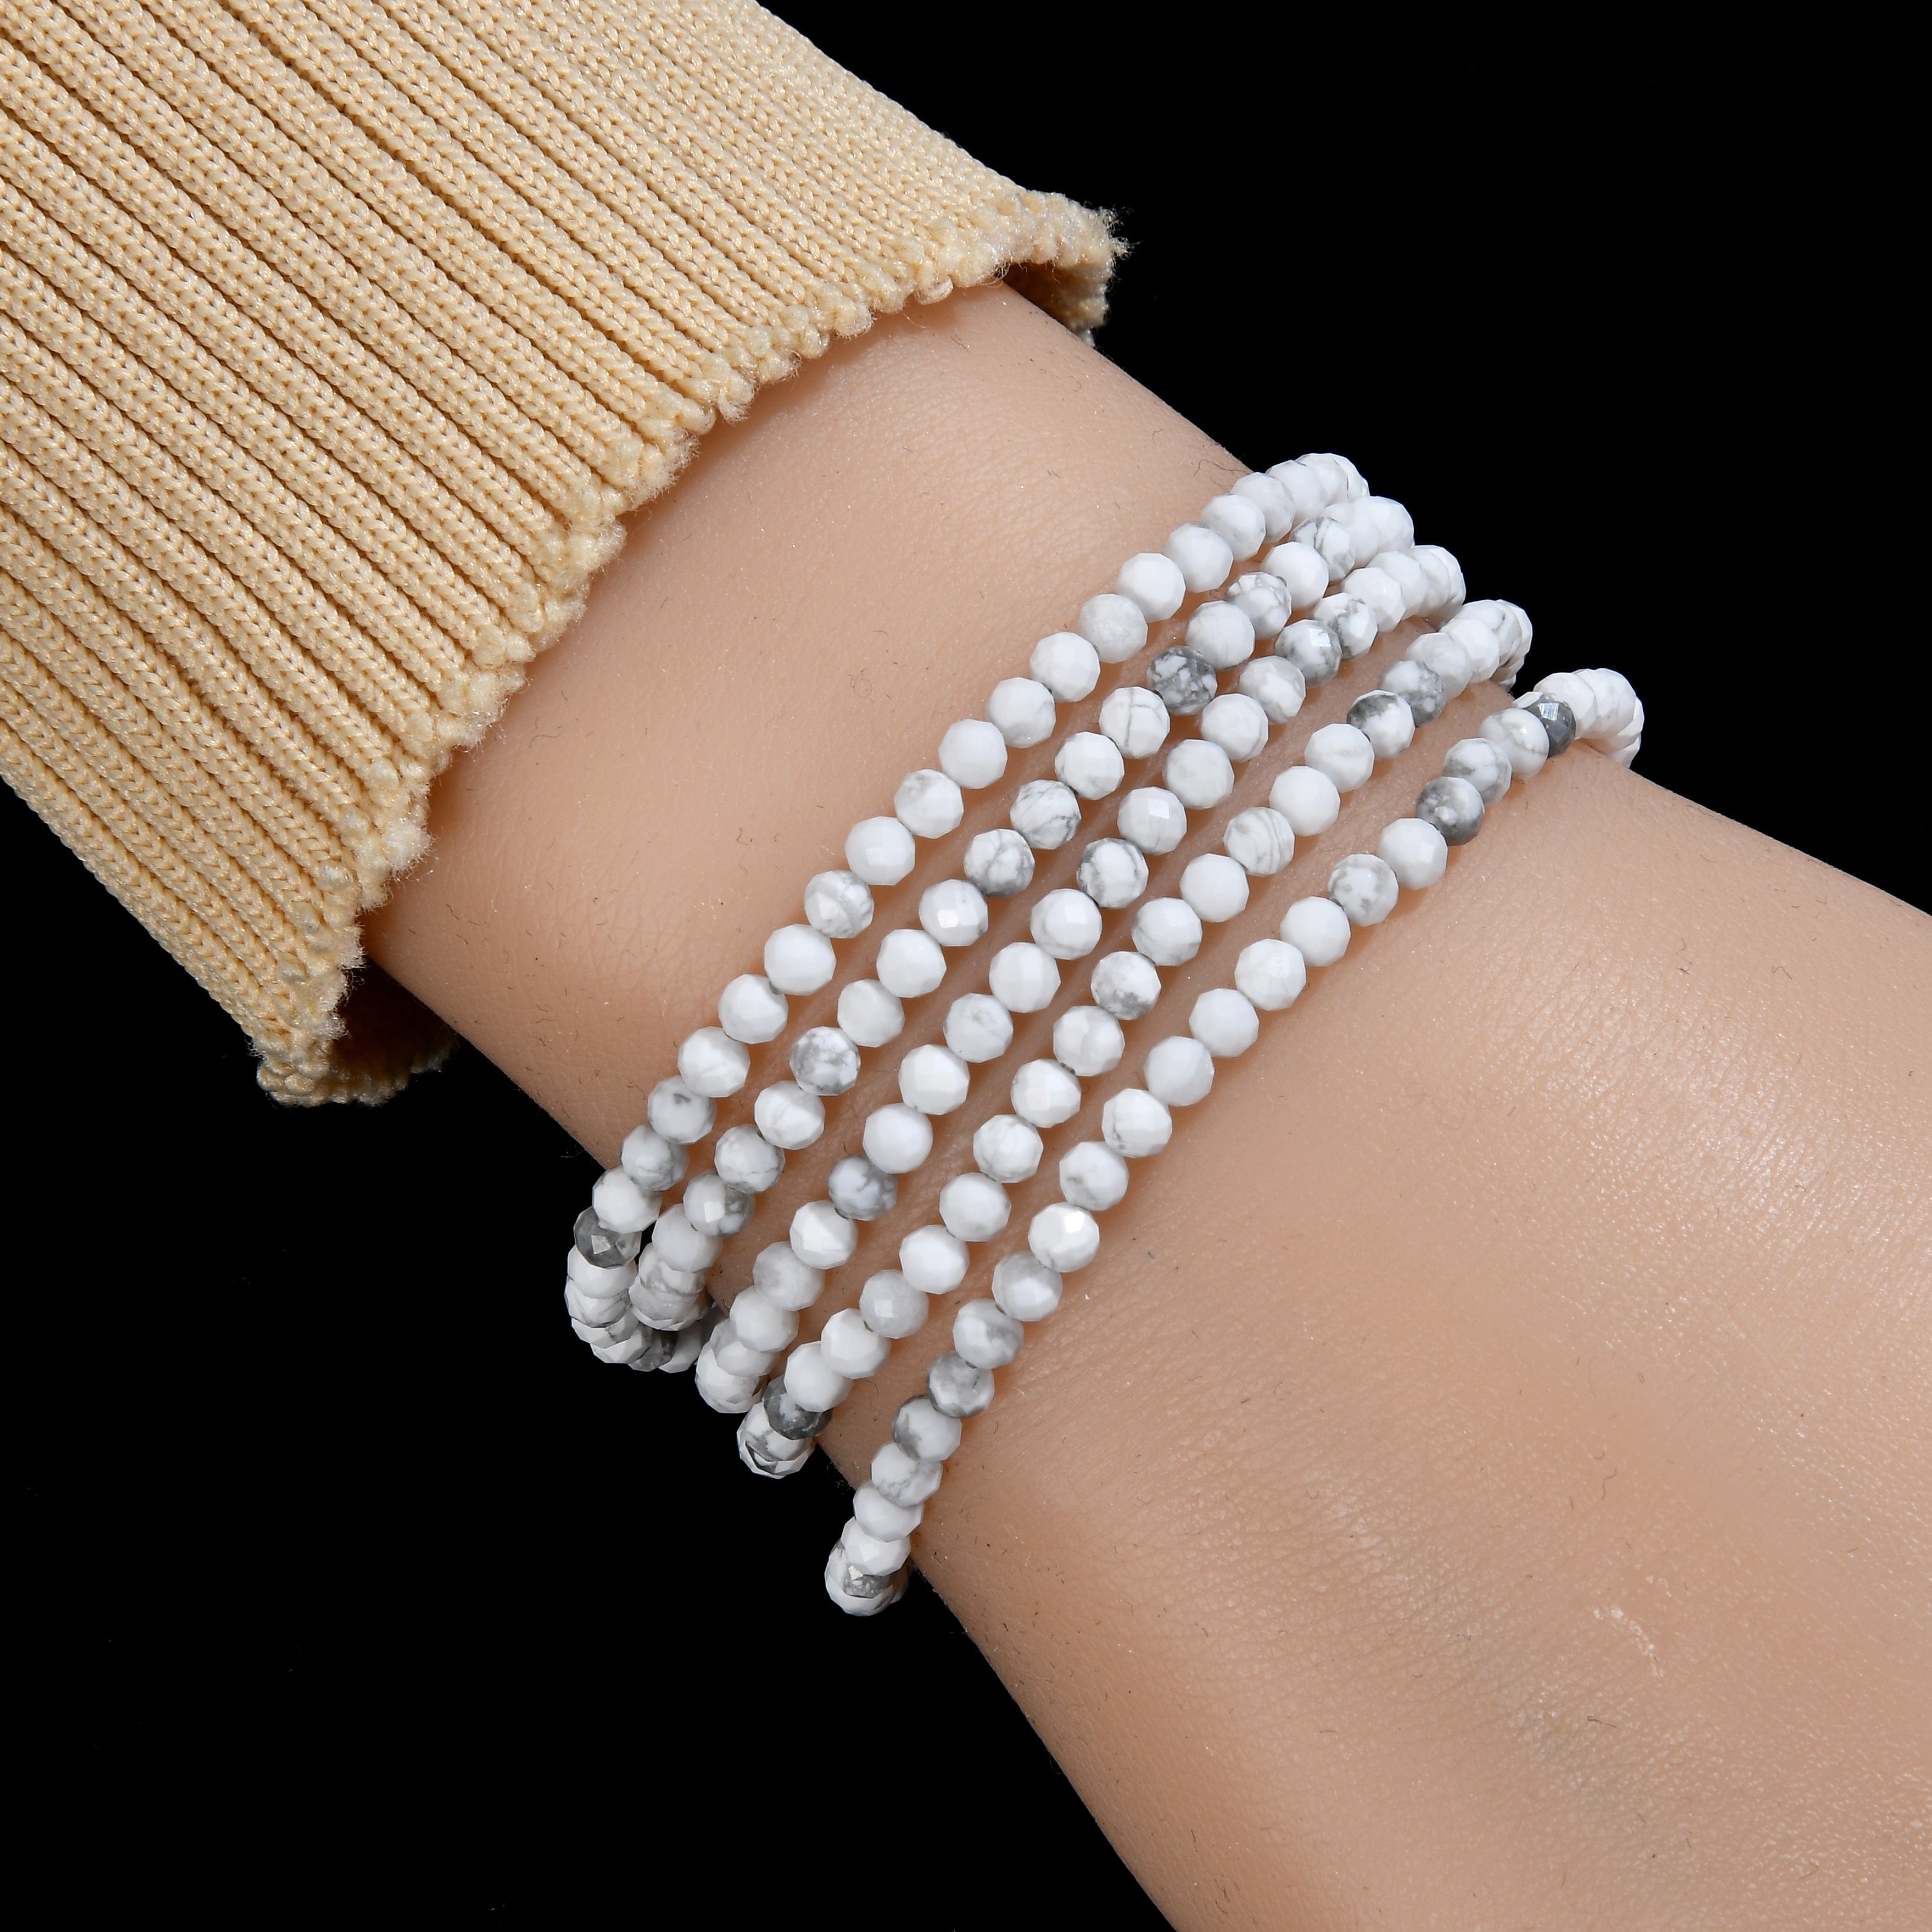 KALIFANO Gemstone Jewelry 3mm Howlite Faceted 31" Necklace / Multi Wrap Bracelet N3-79S-HT